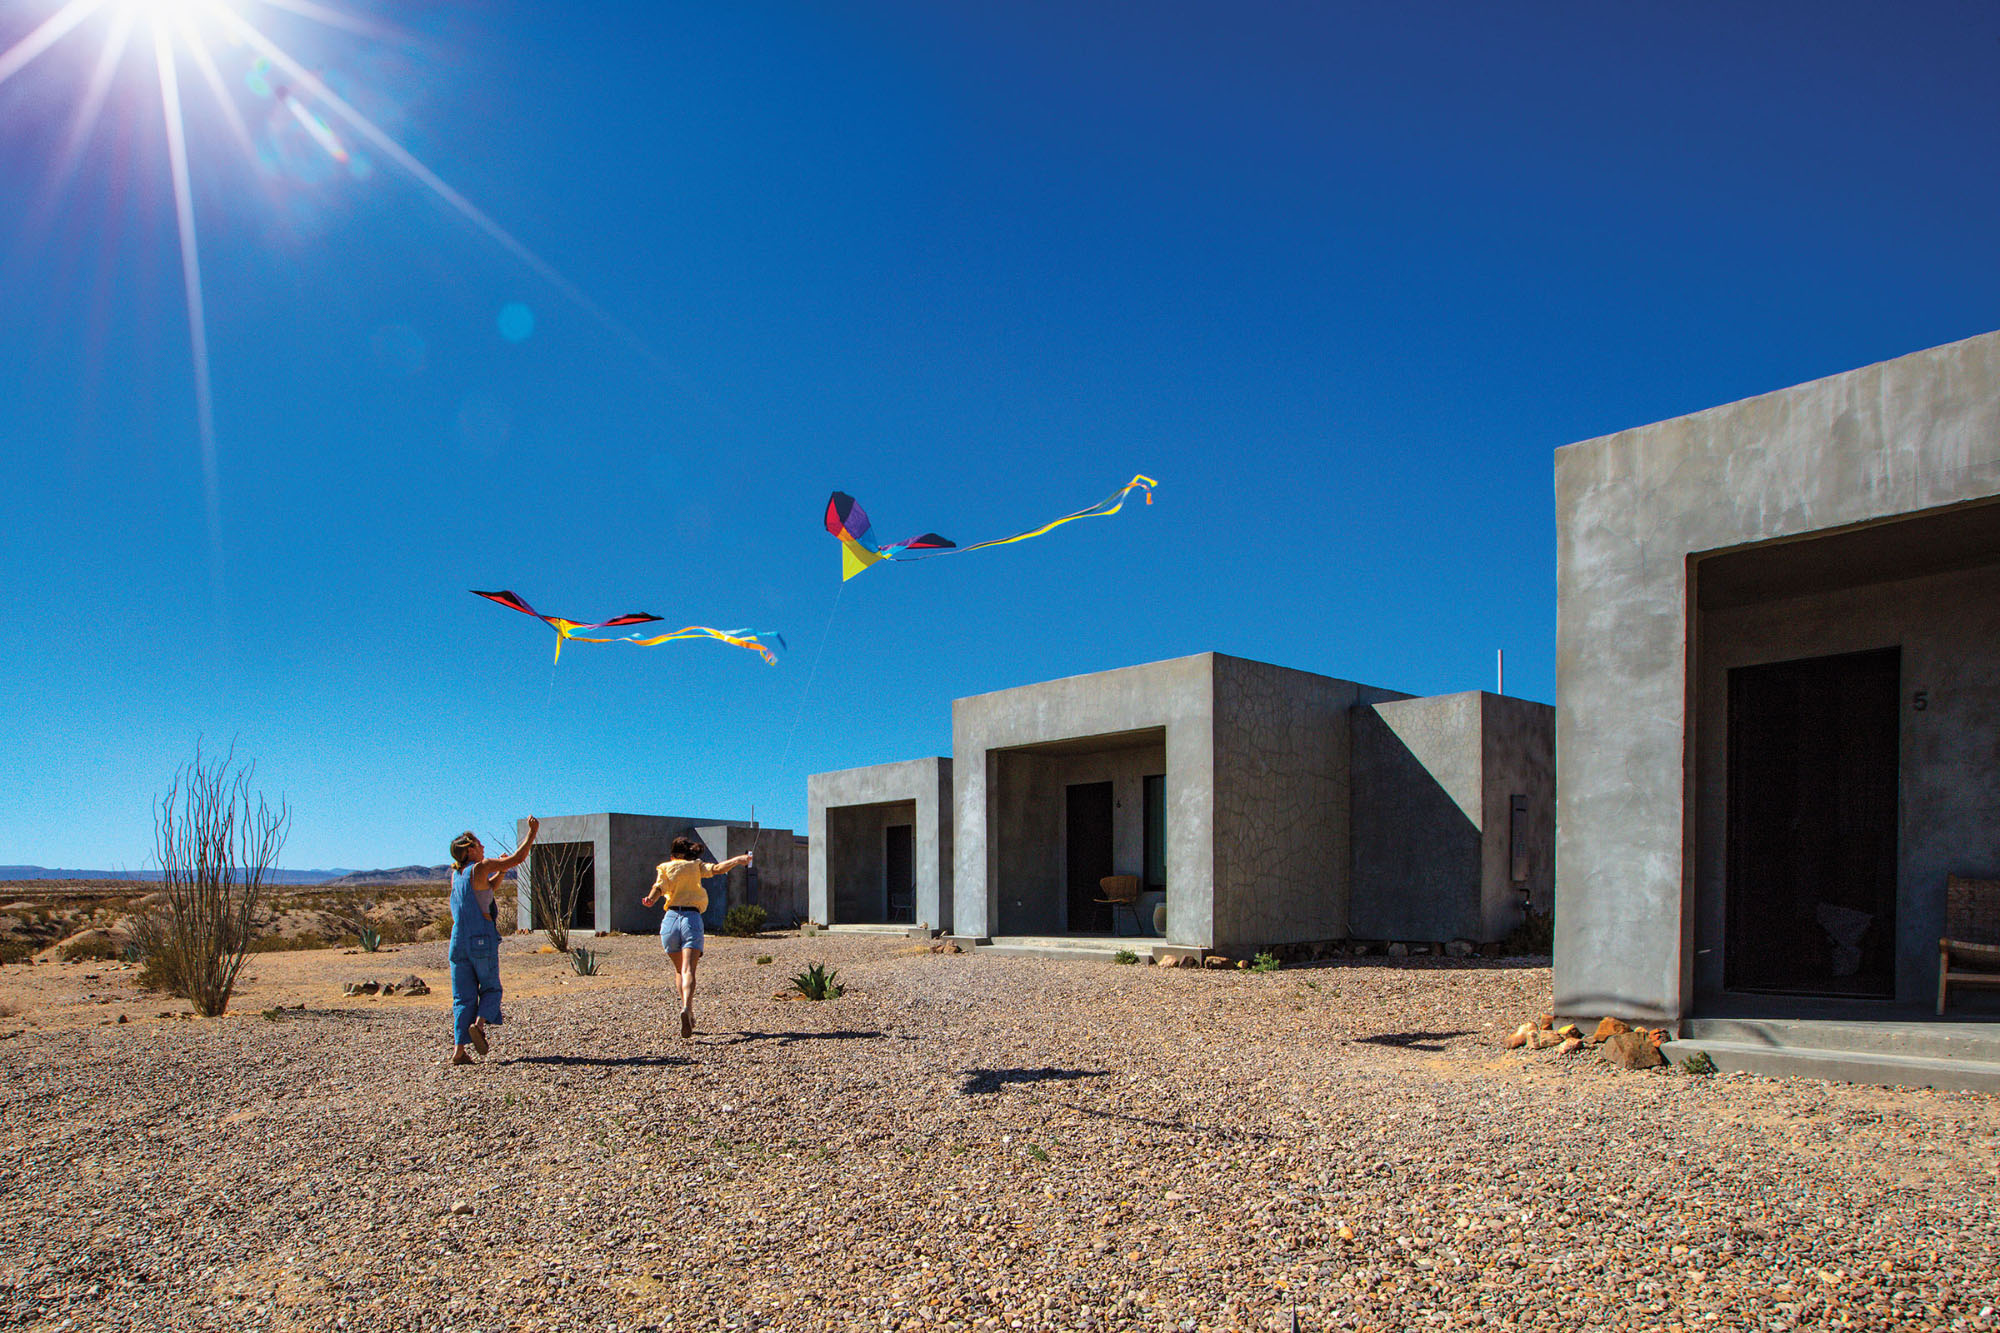 Large gray concrete boxes along the right side frame two people flying colorful kites in the bright blue sky above a brown desert scene